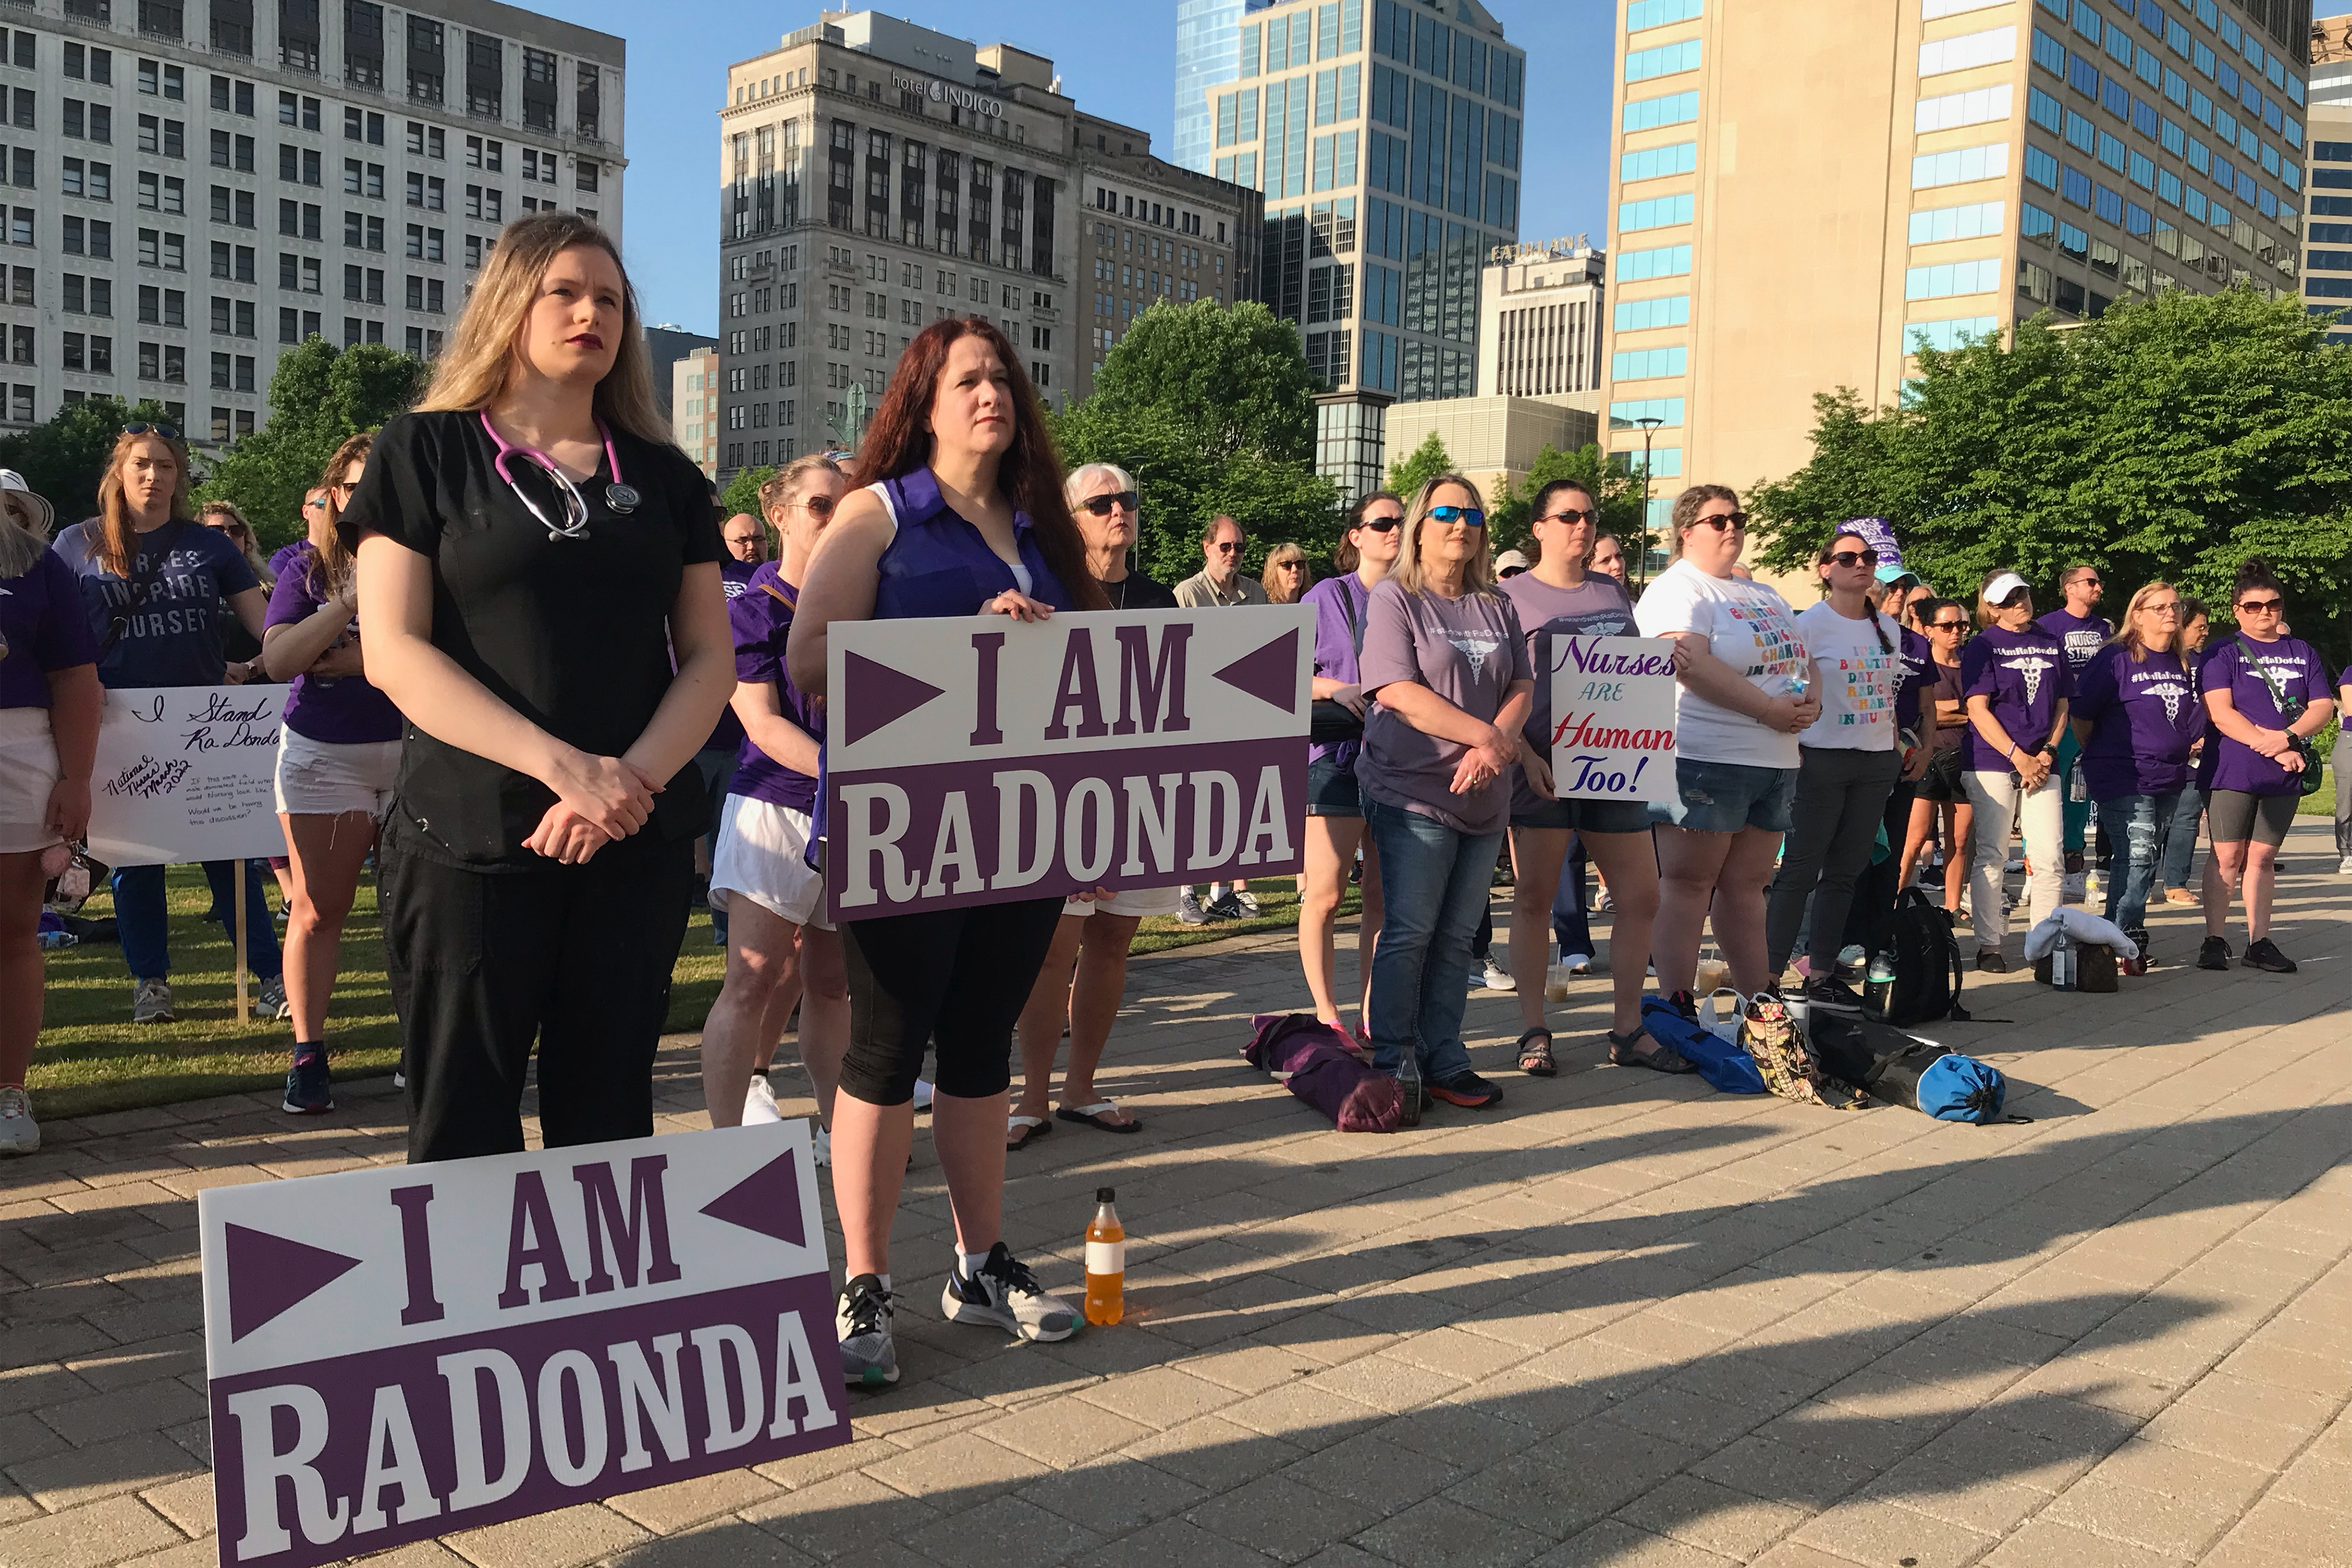 A crowd of protesters is seen holding signs which read, "I am Radonda." Most of the crowd is wearing purple clothes.